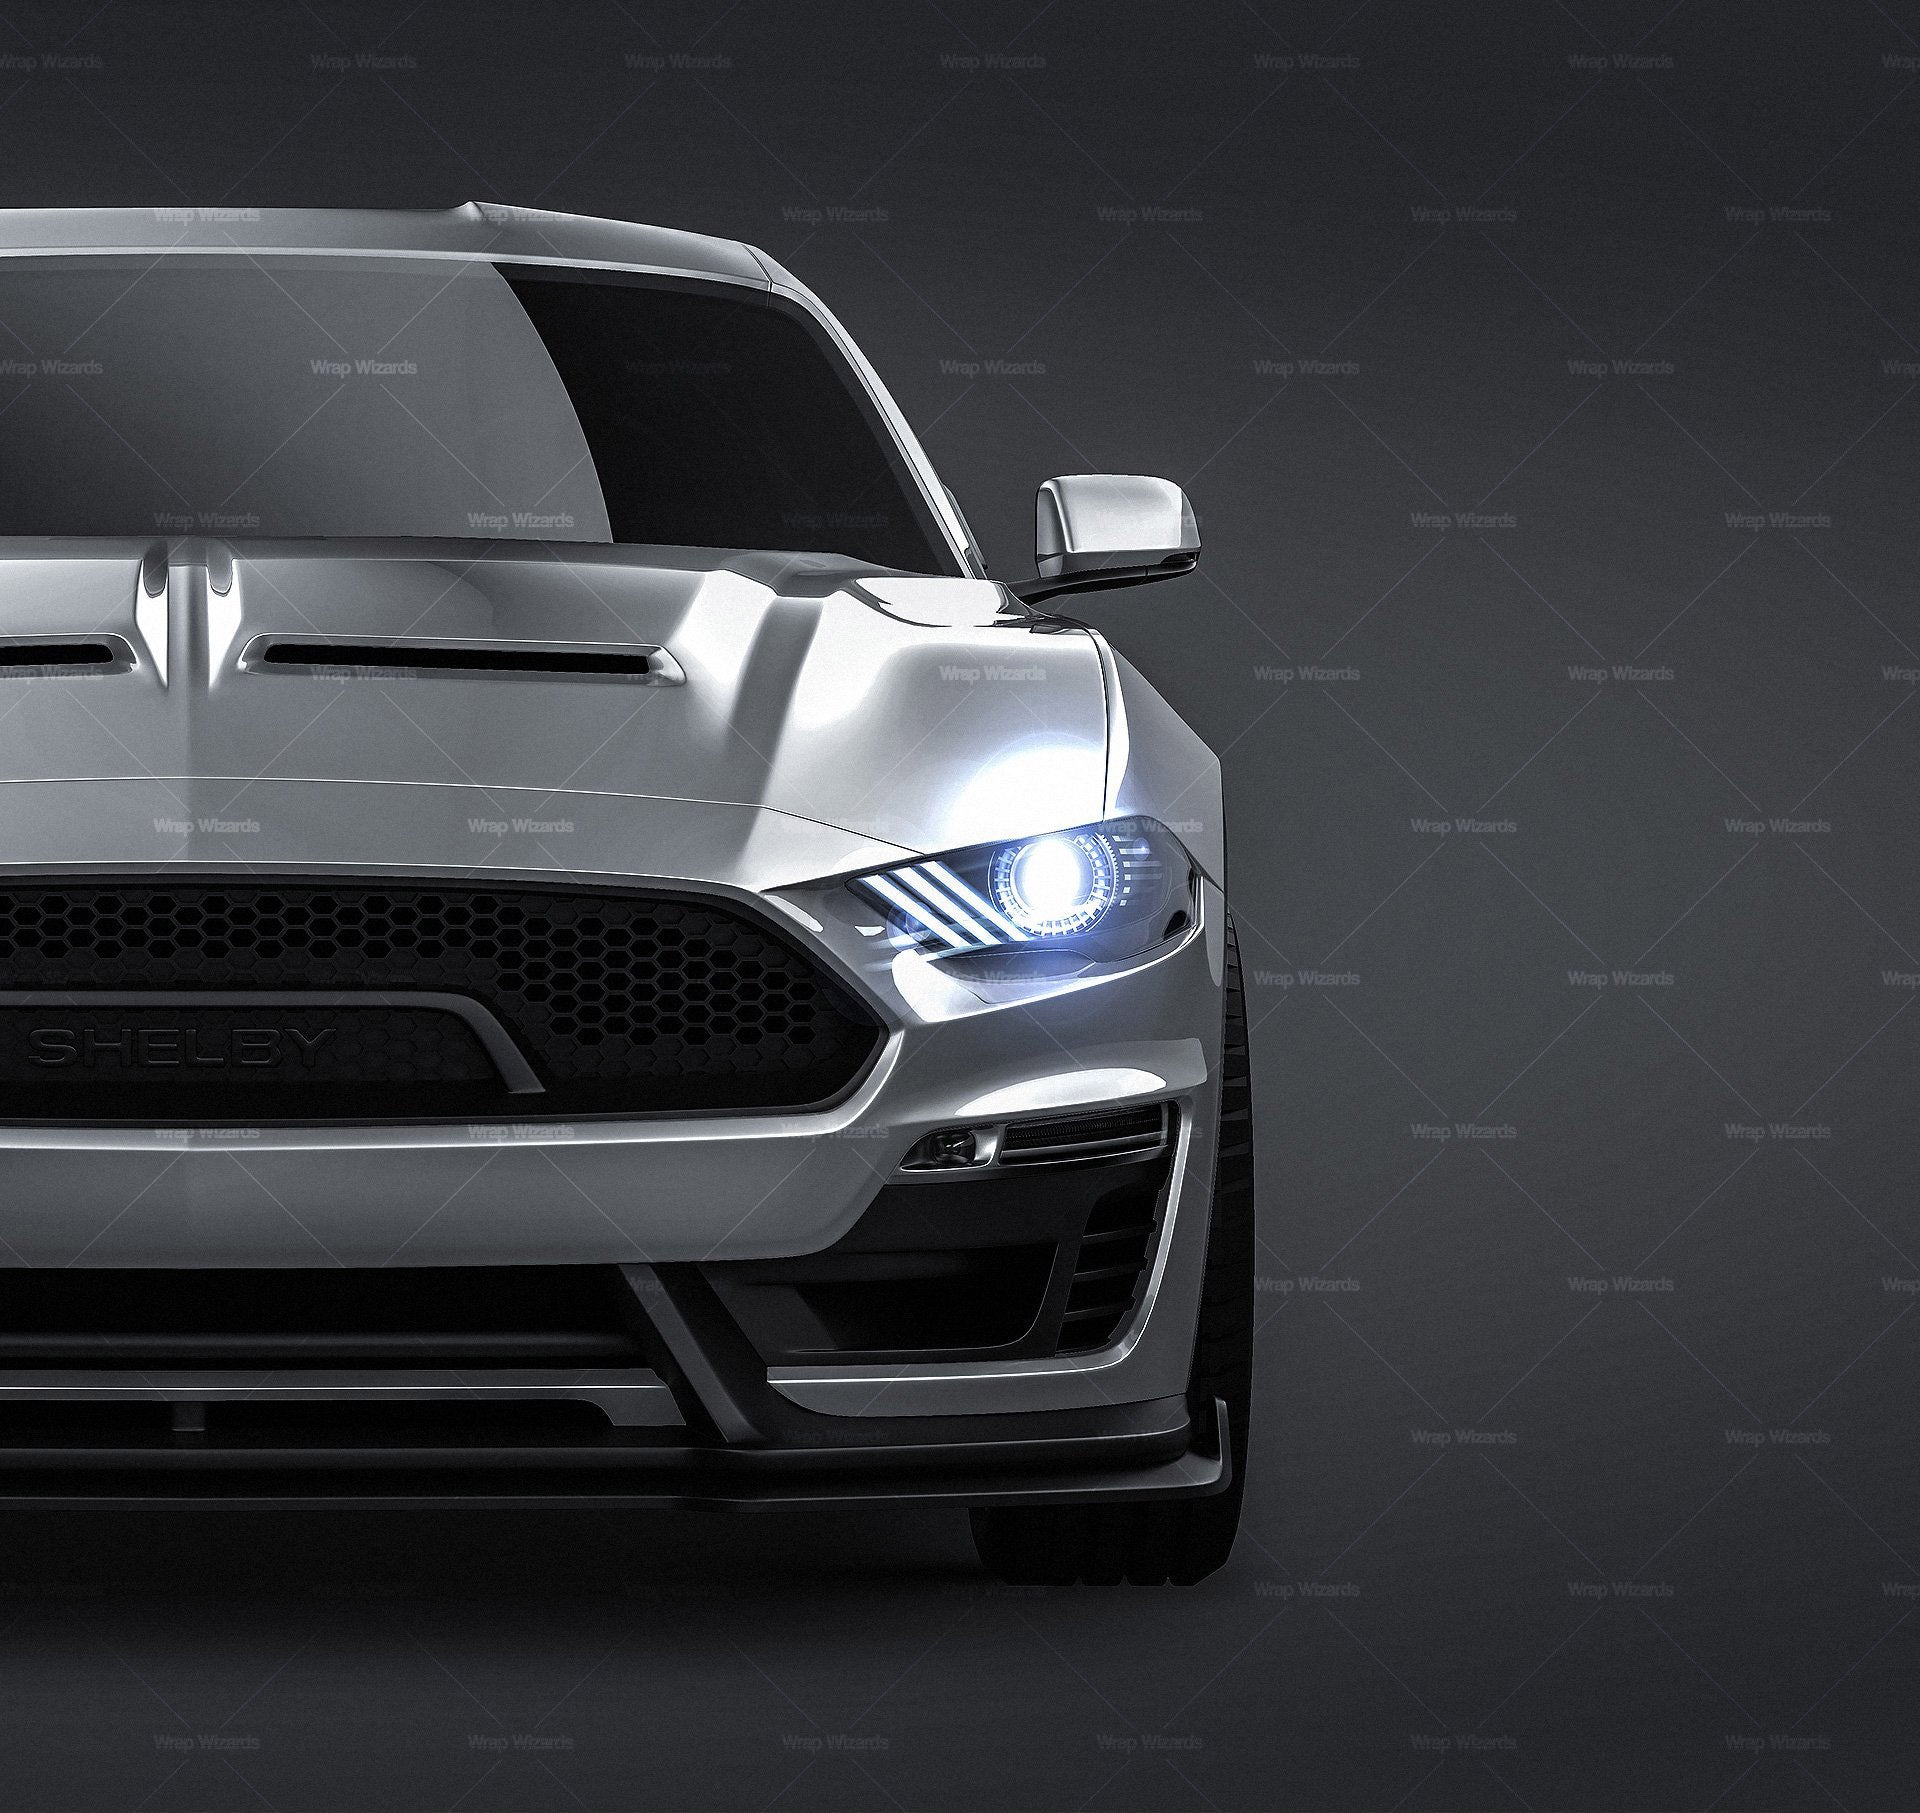 Ford Mustang Shelby Super Snake 2018 glossy finish - all sides Car Mockup Template.psd